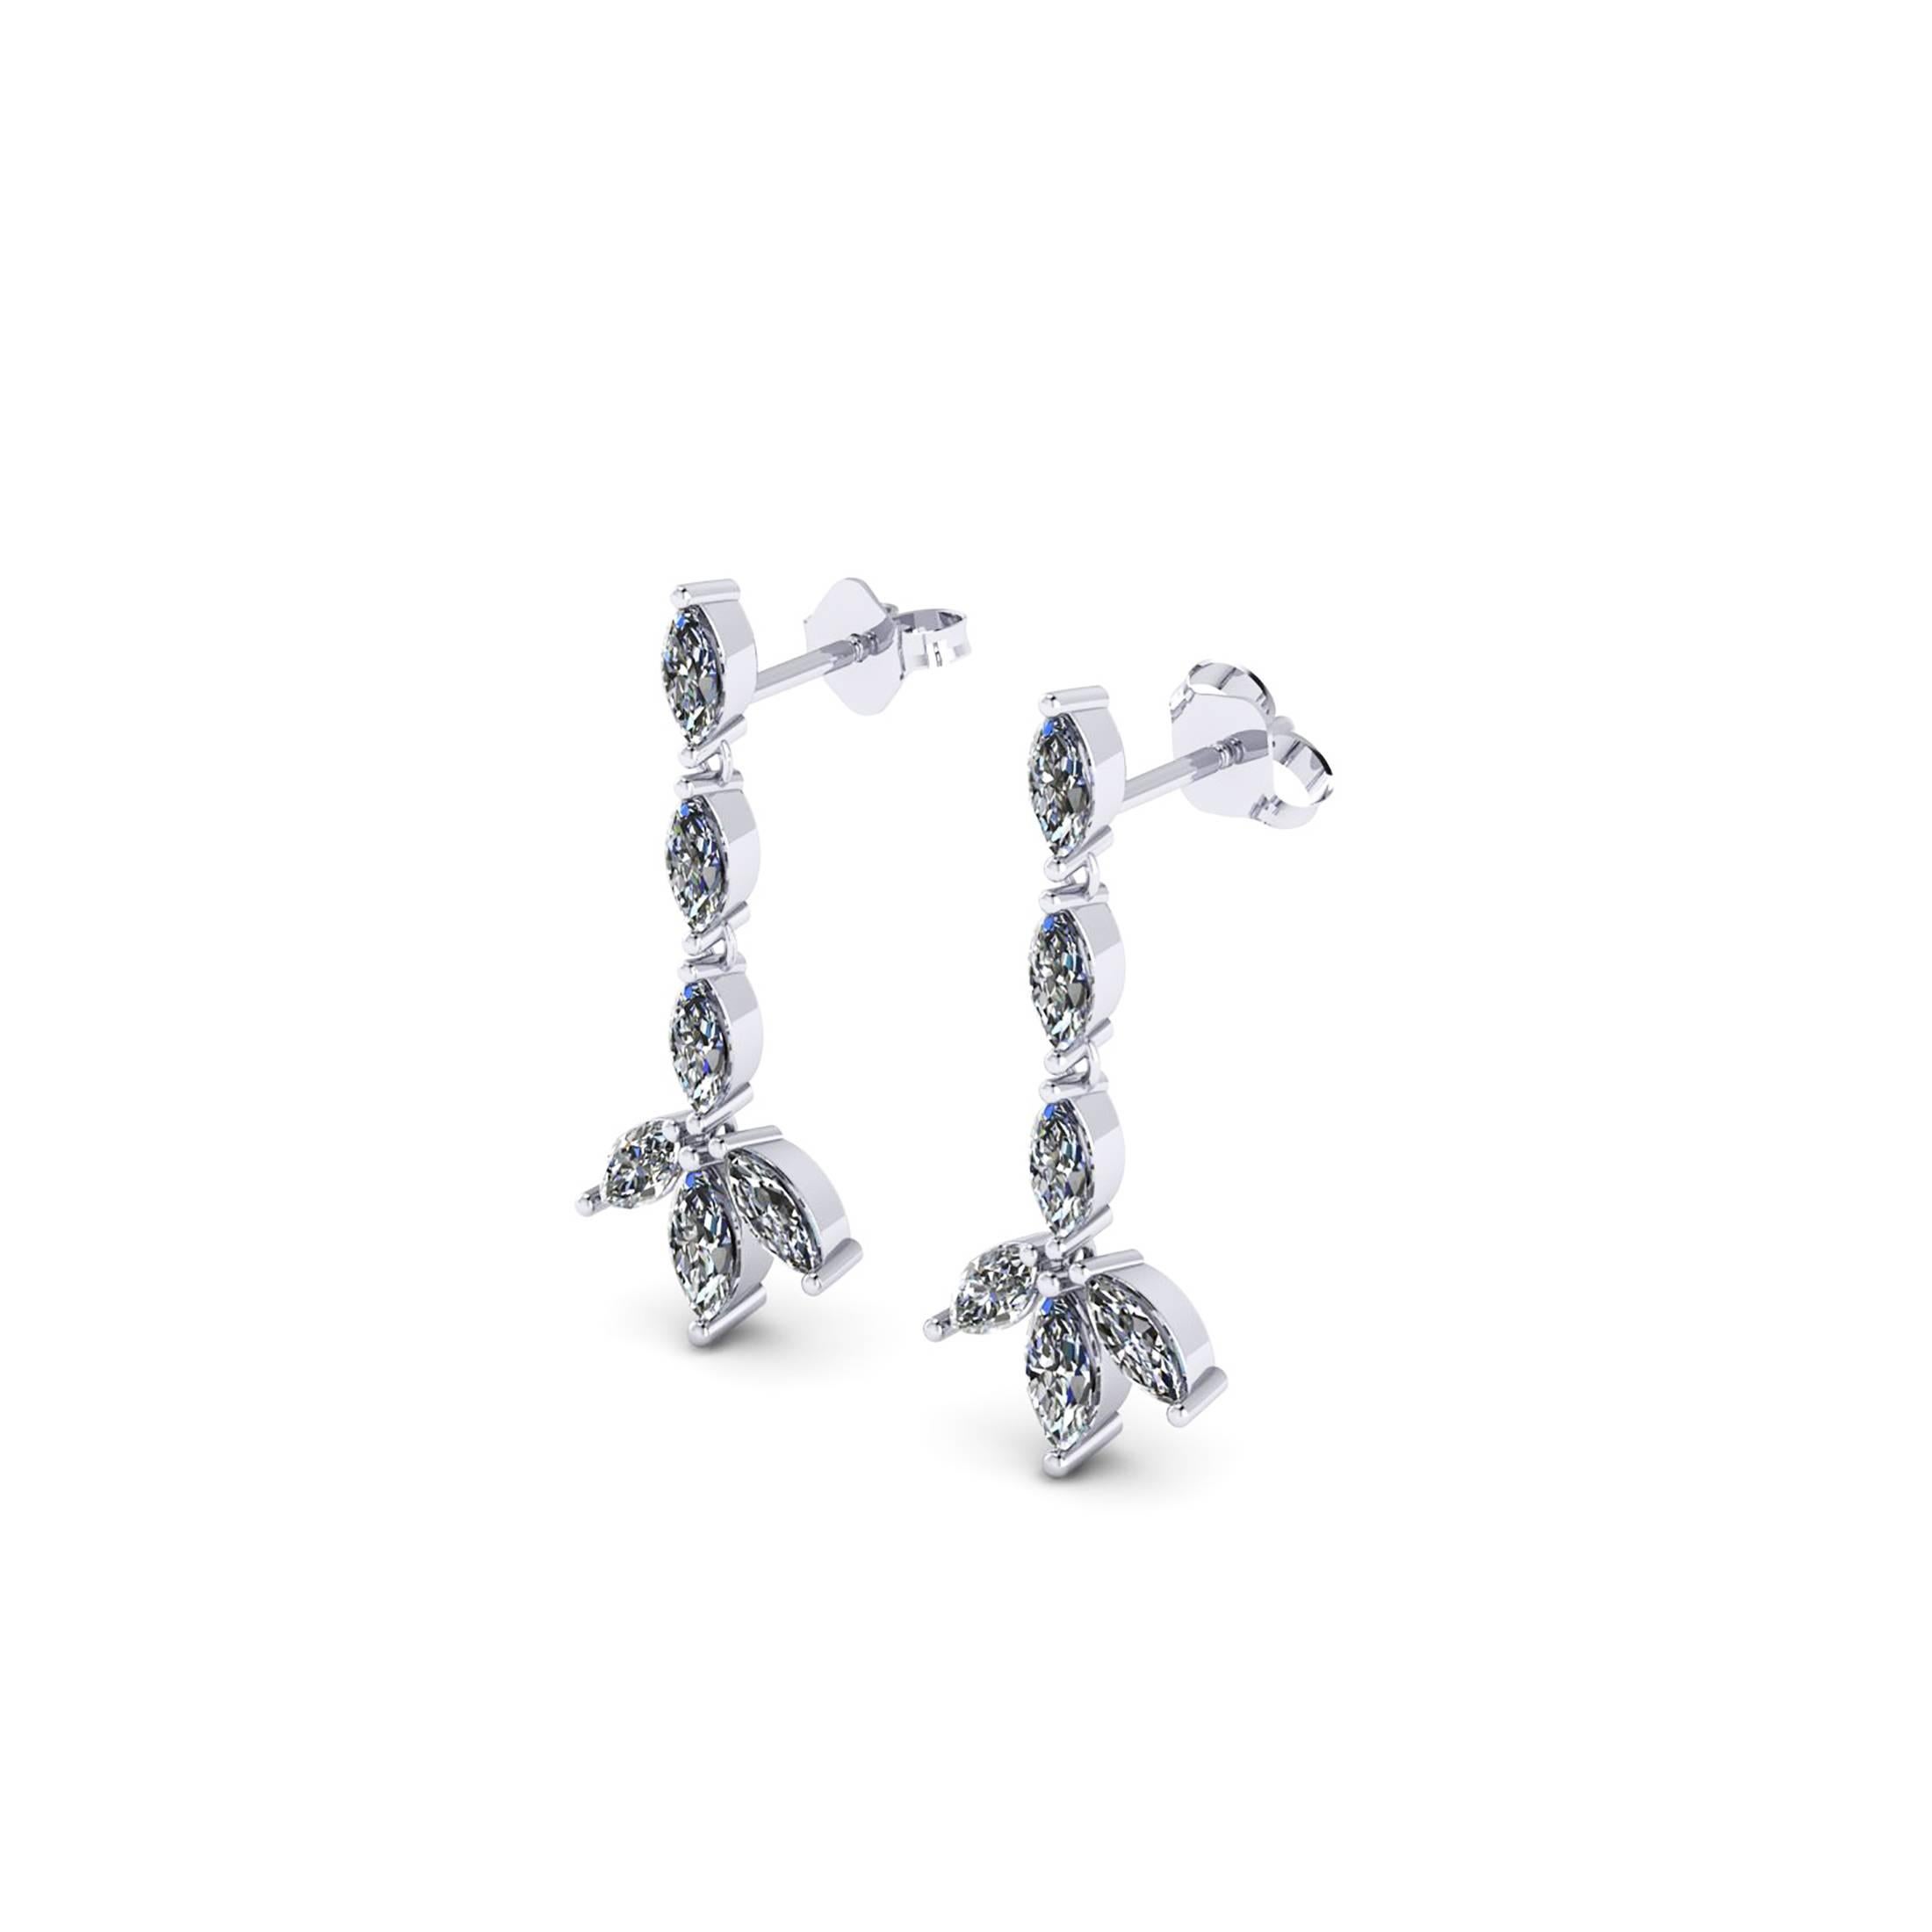 Ferrucci 1.24 carats Marquise Diamonds dangling earrings, hand made in New York City by master jeweler and Designer Francesco Ferrucci. The diamonds are hand picked and selected based on clarity and color, in order to obtain the maximum bright white